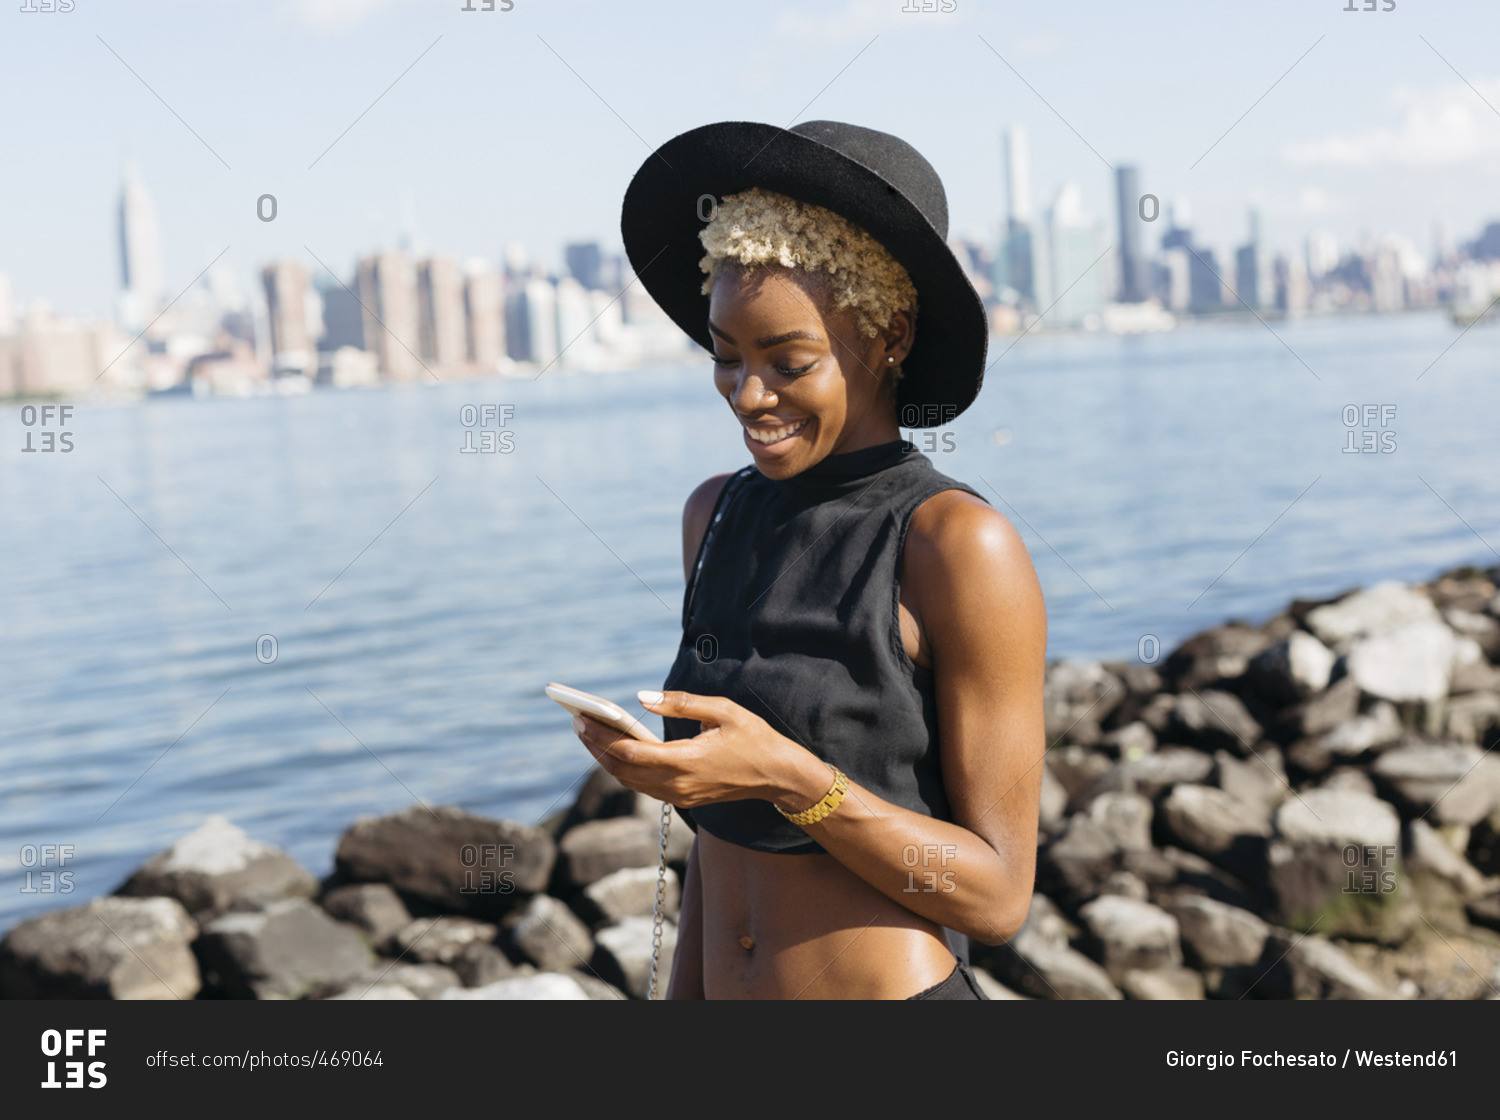 USA- New York City- Brooklyn- smiling young woman at East River looking on cell phone